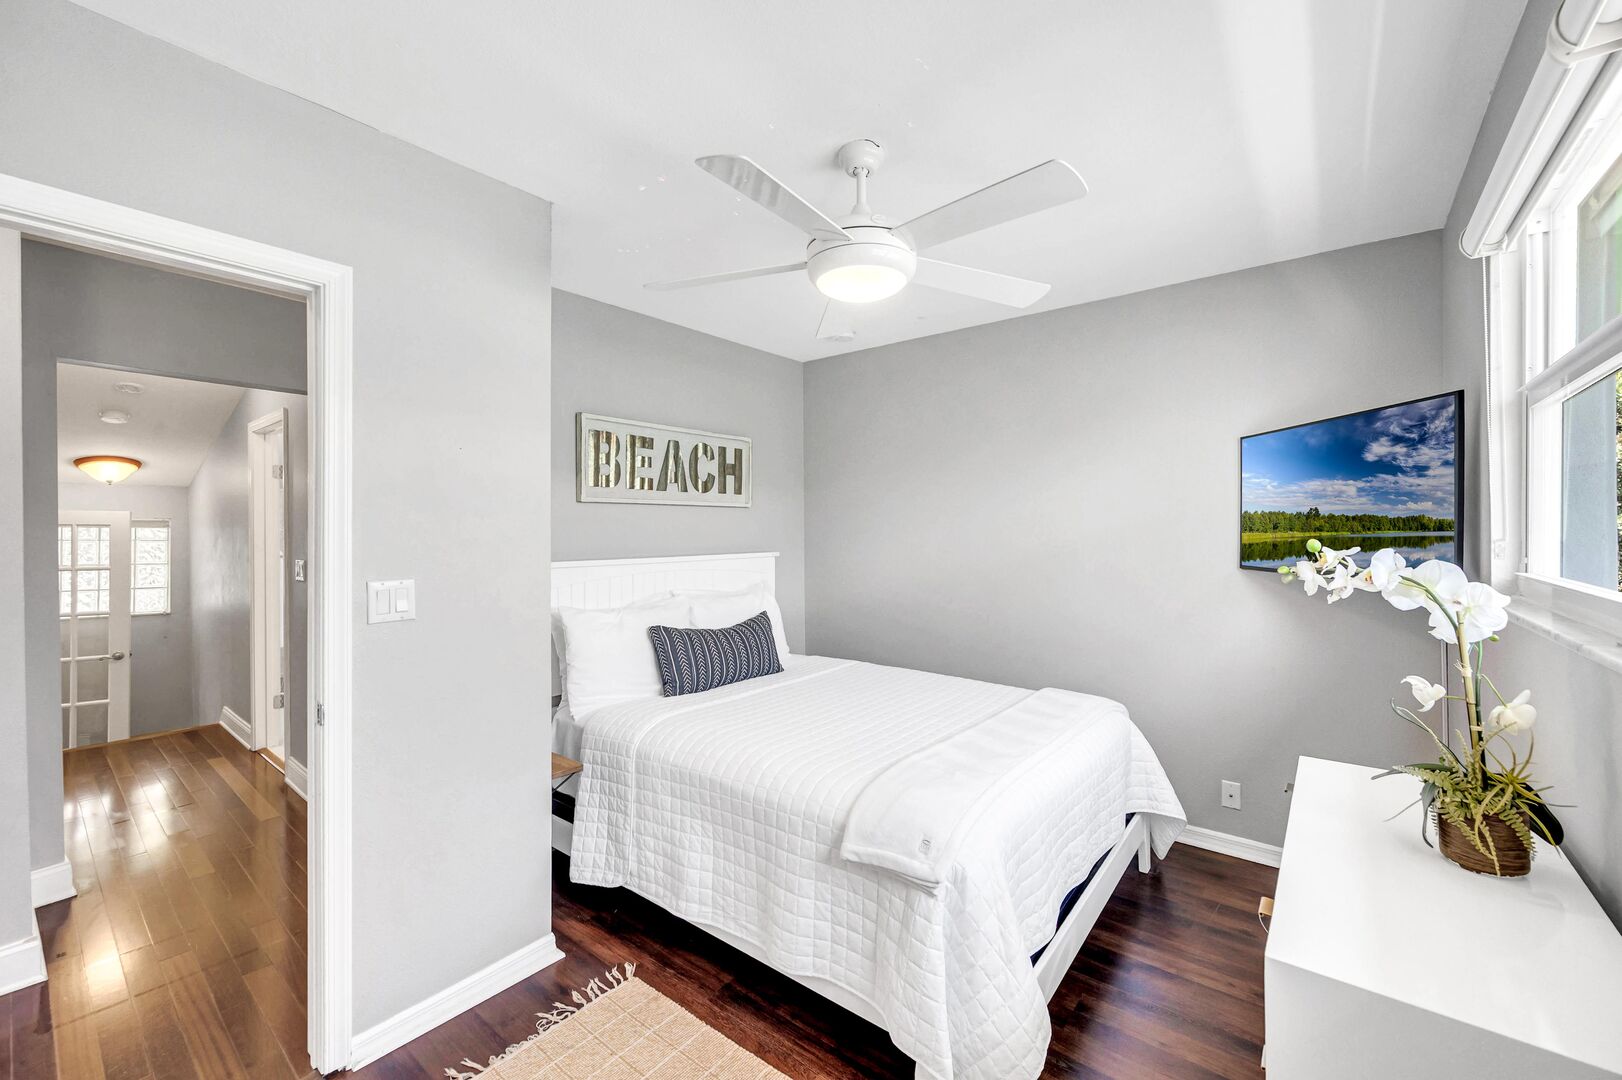 The third guest bedroom offers a queen-sized bed, a dresser and a smart T.V.